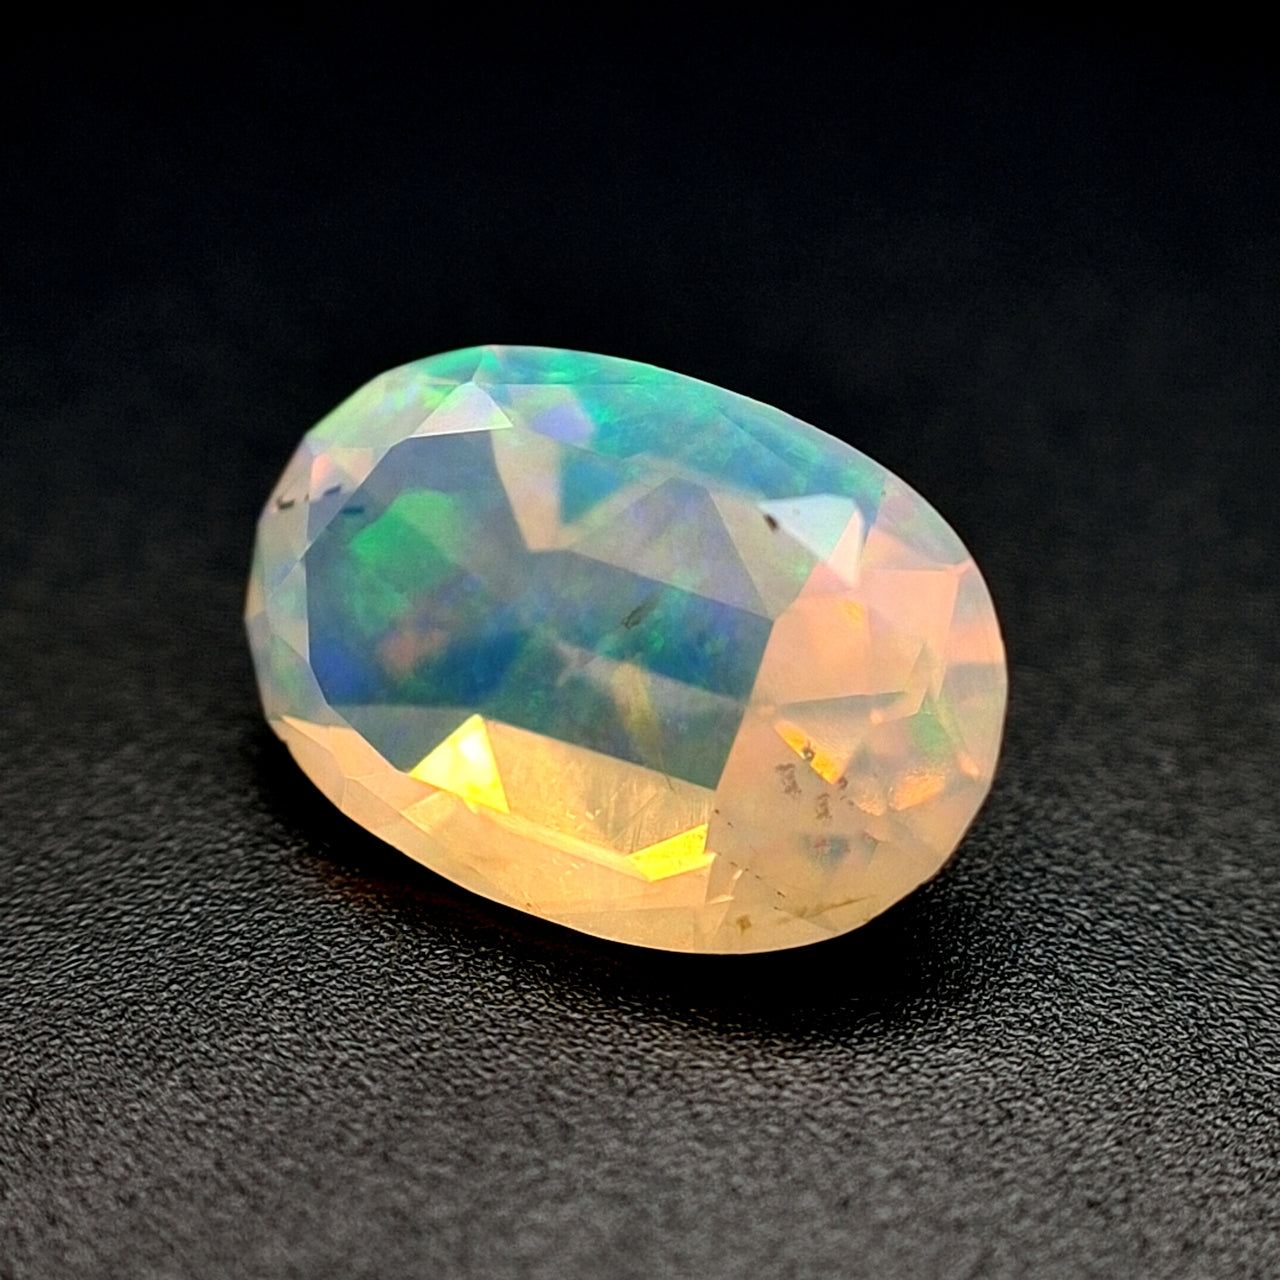 2.47ct Australian Opal, Faceted - Oval